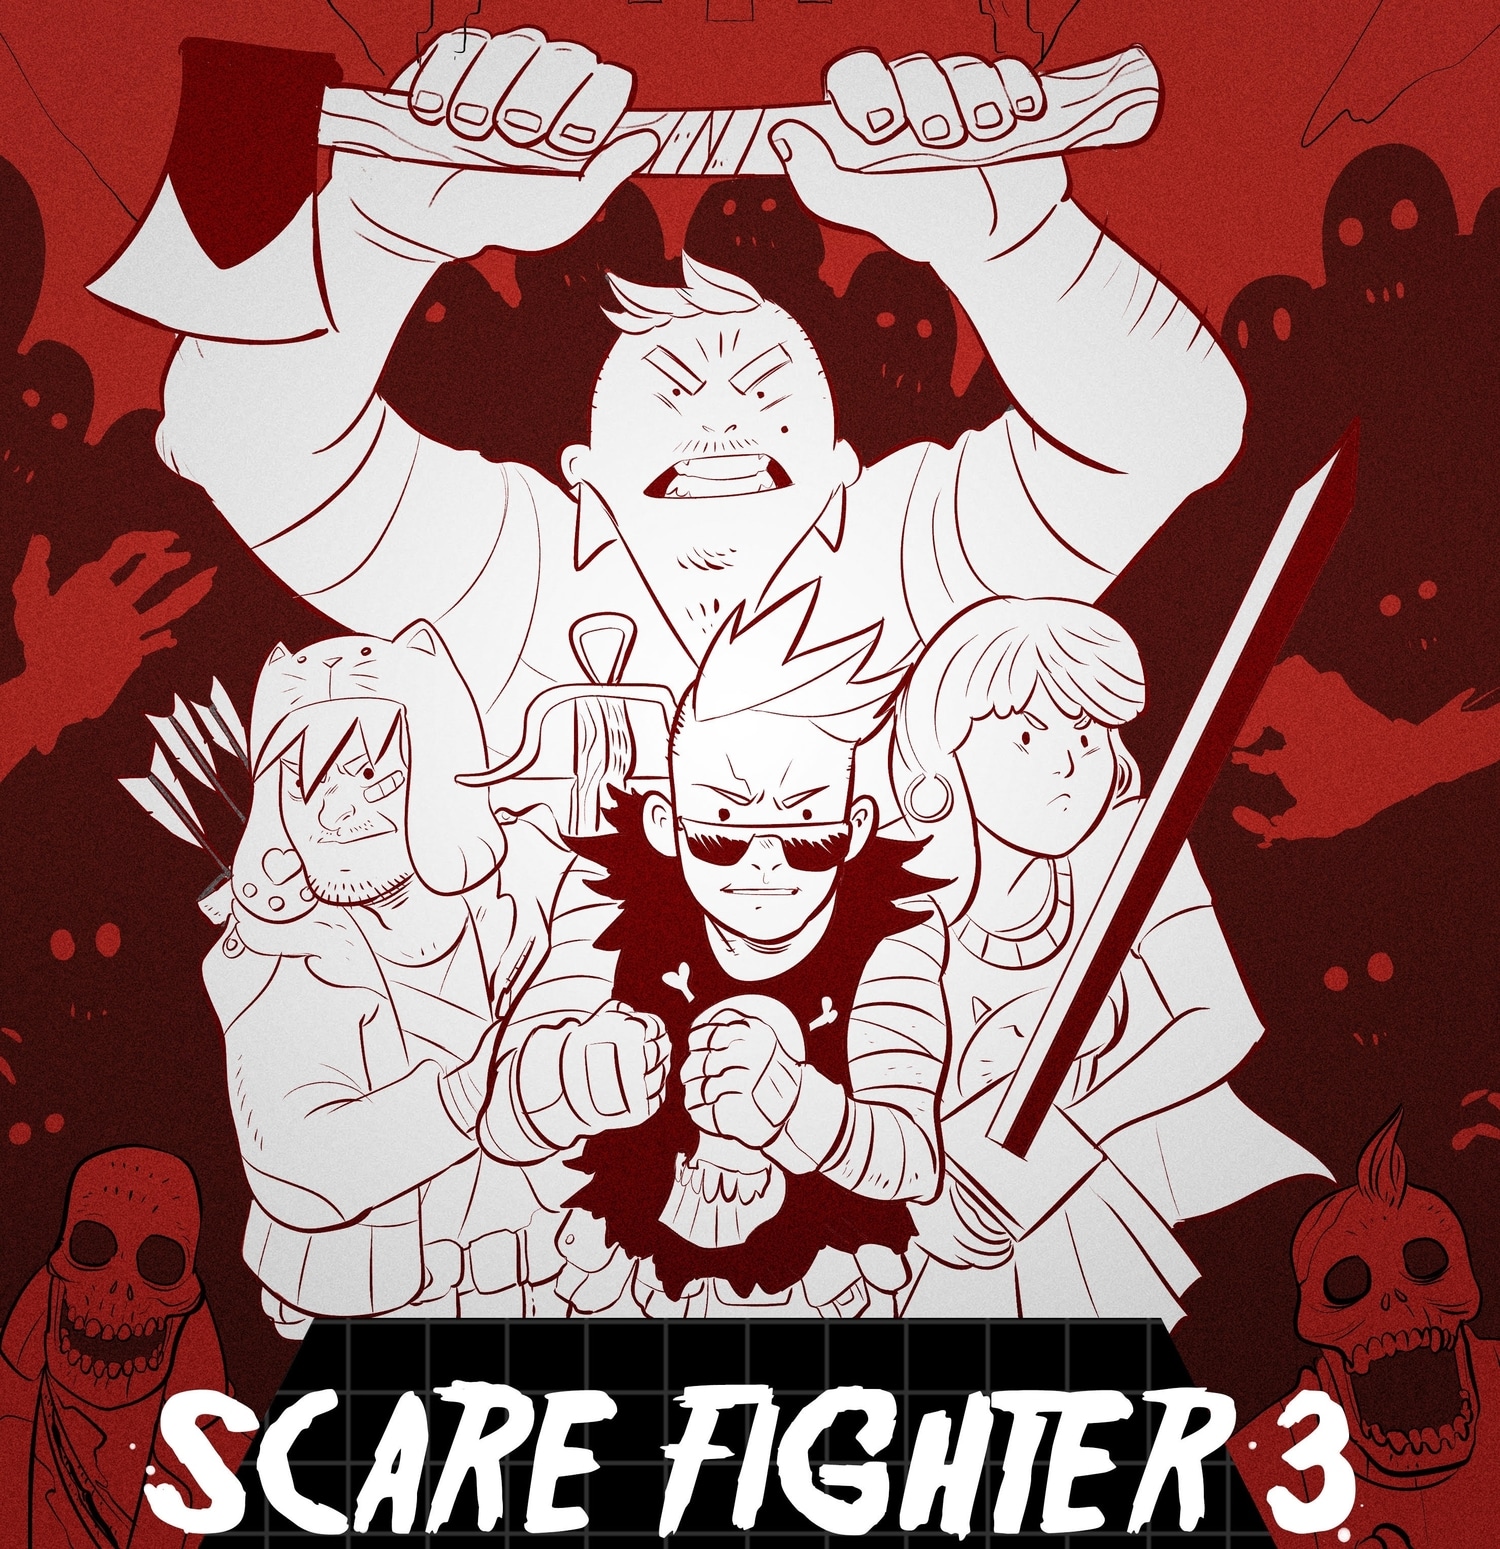 SCARE FIGHTER 3